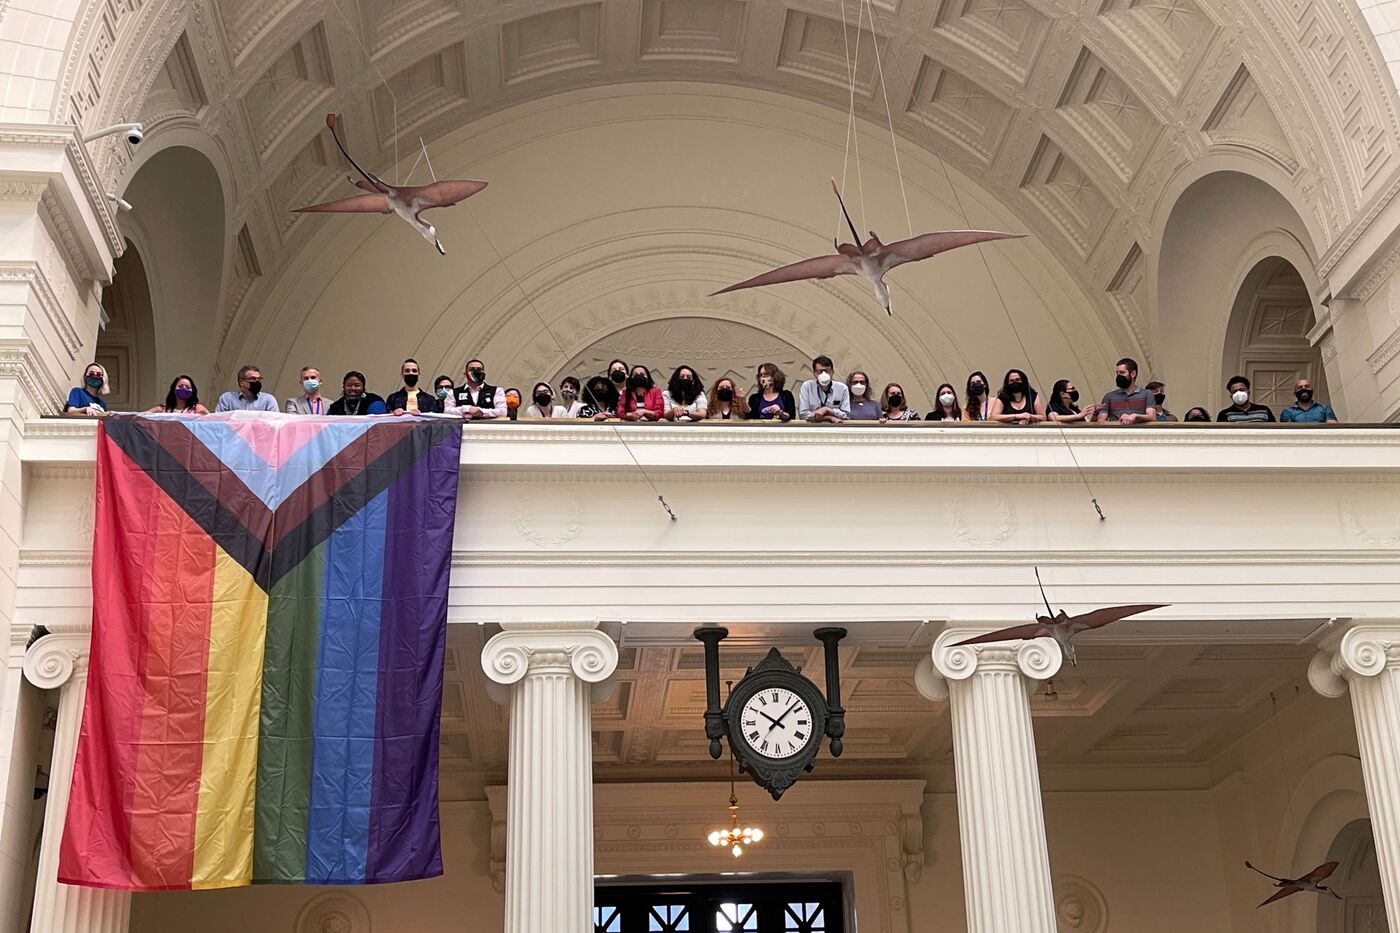 A group of people like the mezzanine of the museum, with the progressive pride flag hanging.